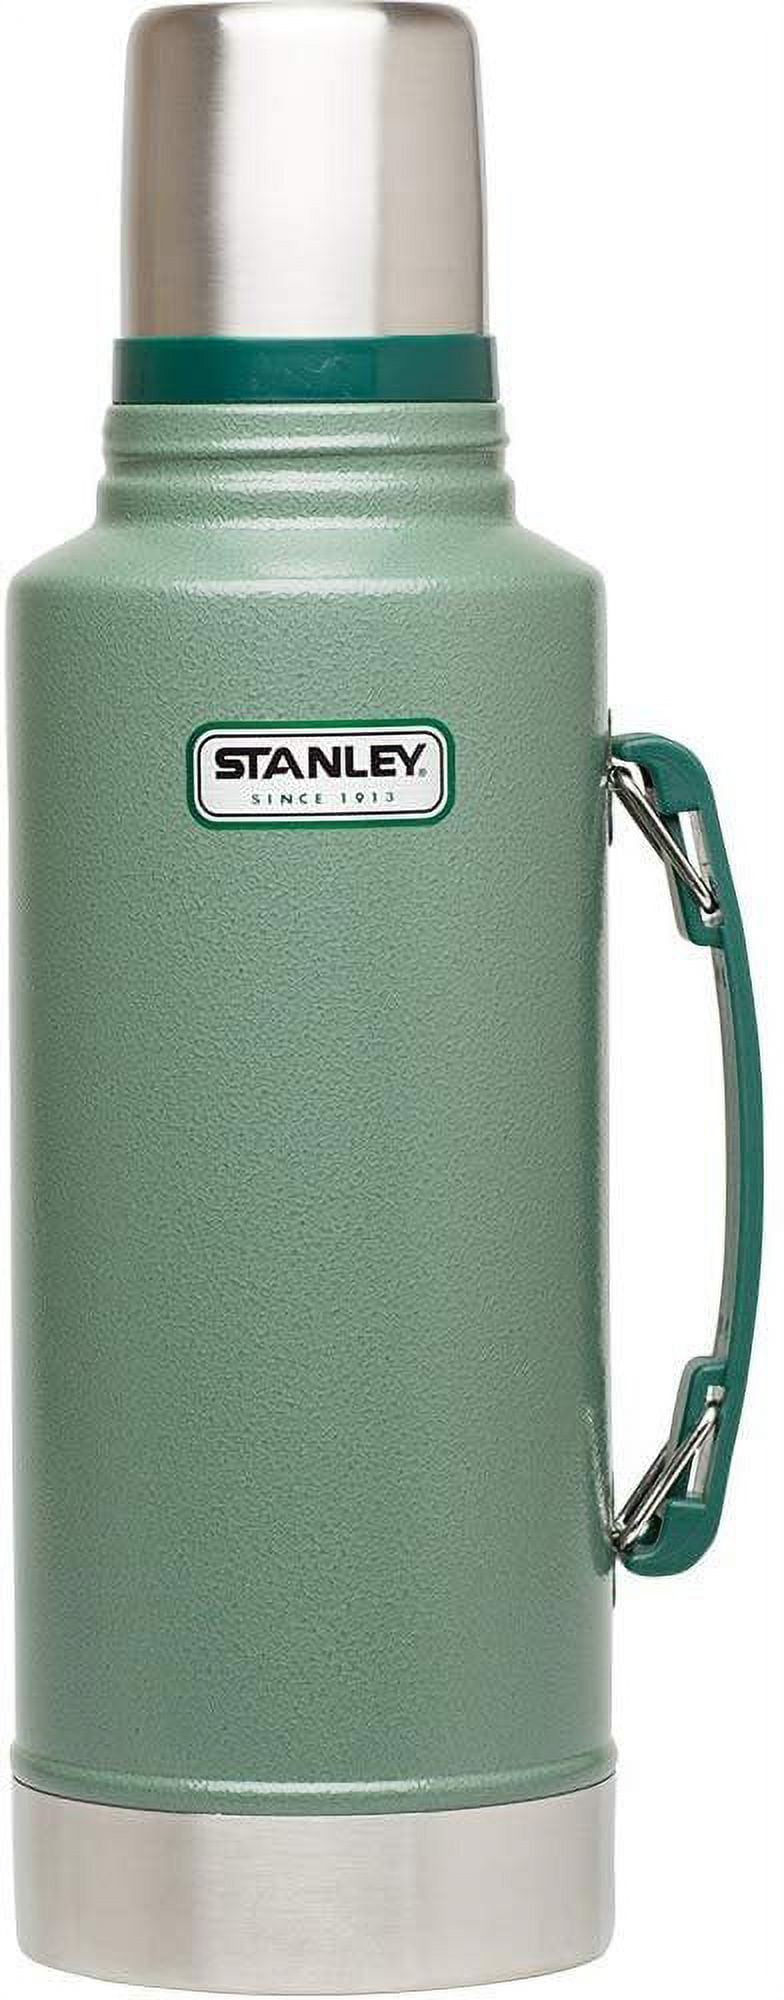 LUAATT Thermos Replacement Stopper,2 Pack Green Water Leakage Prevention  Stopper For Stanley Classic Stainless Steel Vacuum Bottle(1.1 QT/1.5QT/2 QT)